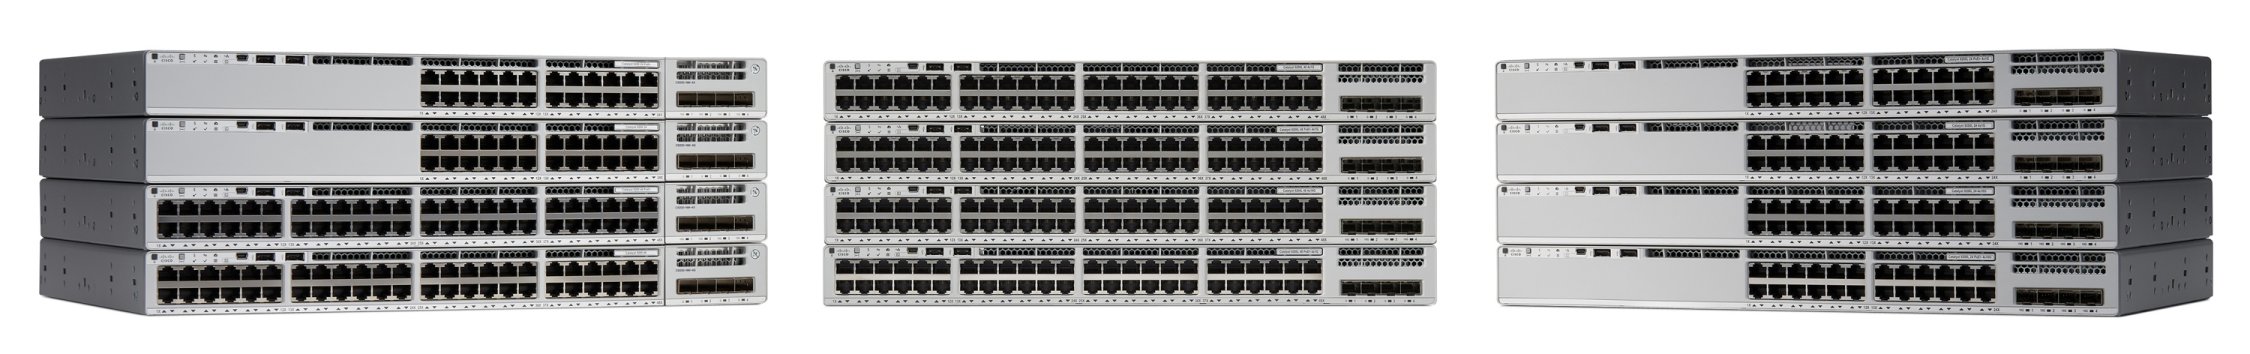 Product image of Cisco Catalyst 9200 Series Switches